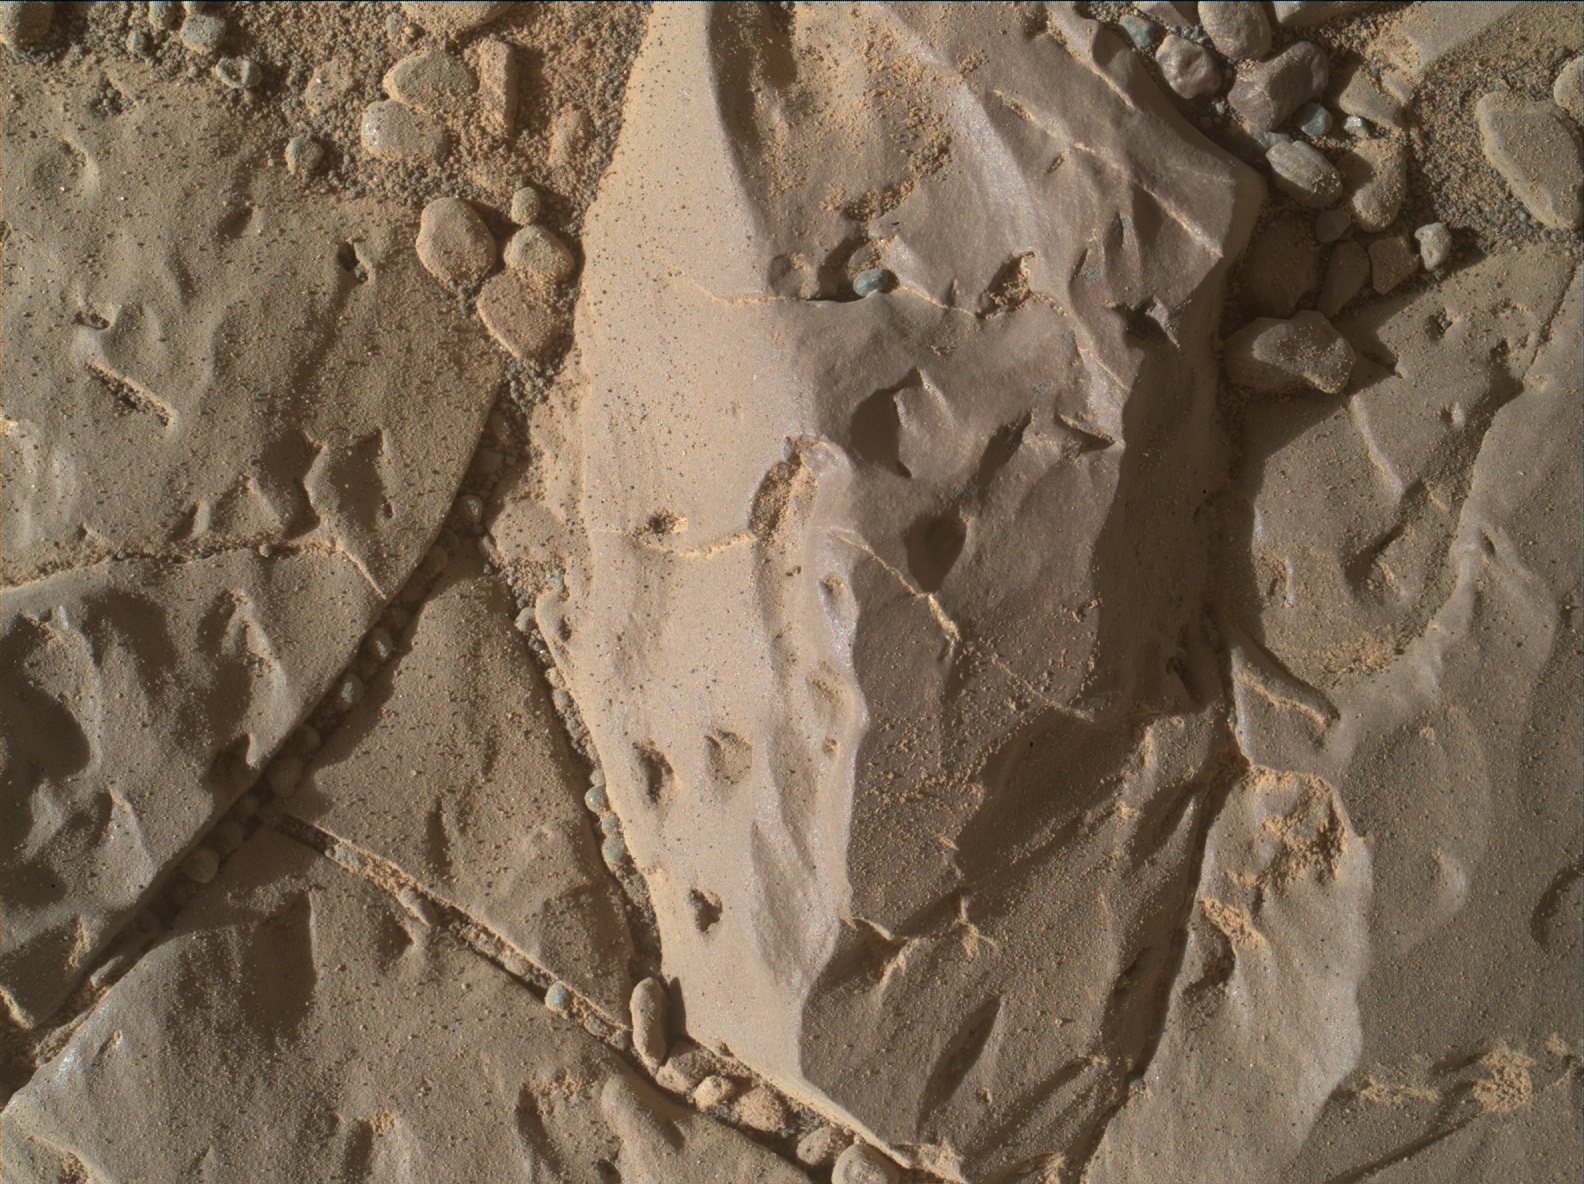 Nasa's Mars rover Curiosity acquired this image using its Mars Hand Lens Imager (MAHLI) on Sol 1896